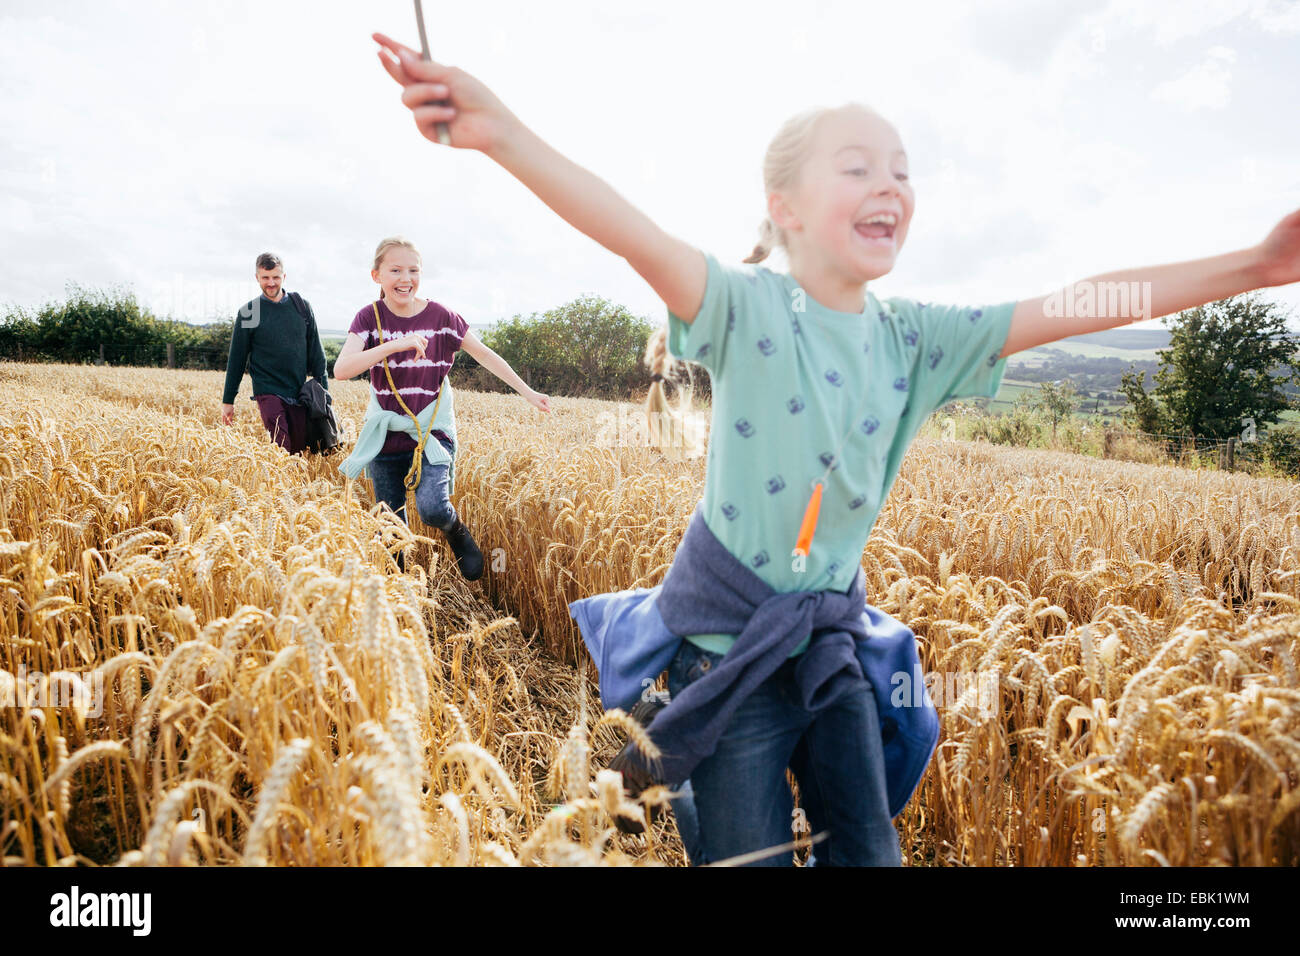 Girl running through field with arms out Stock Photo